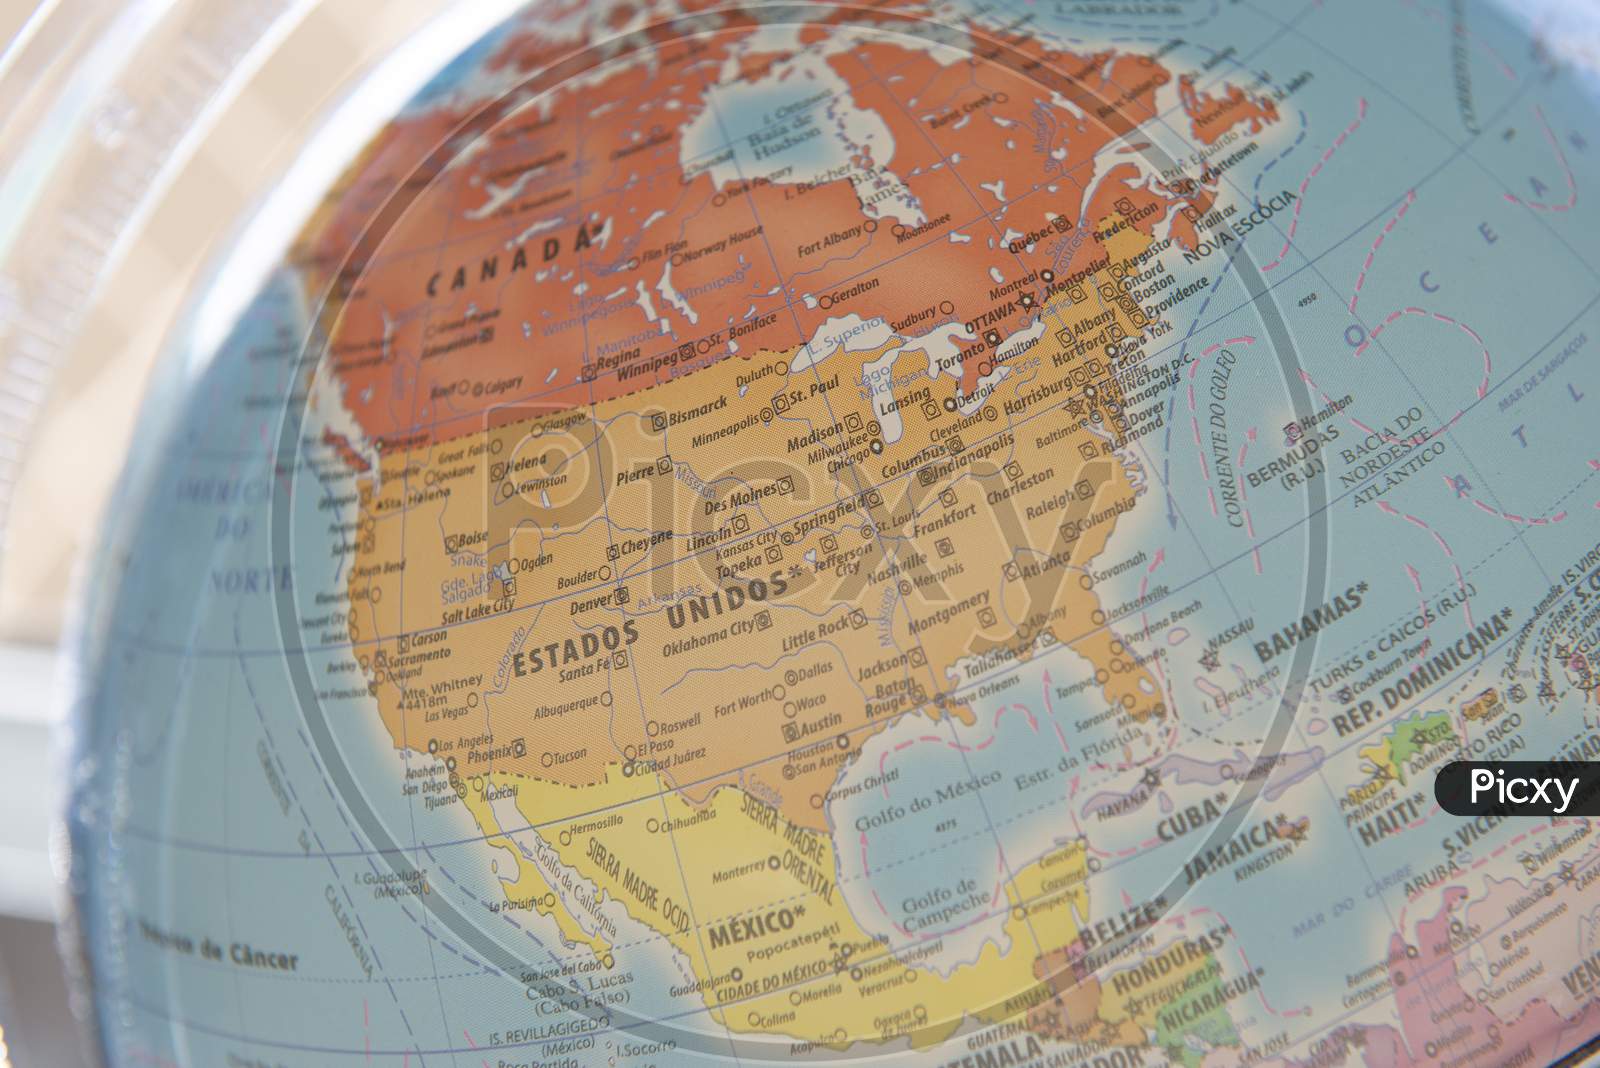 Close Up Of Terrestrial Globe With Focus On North America.